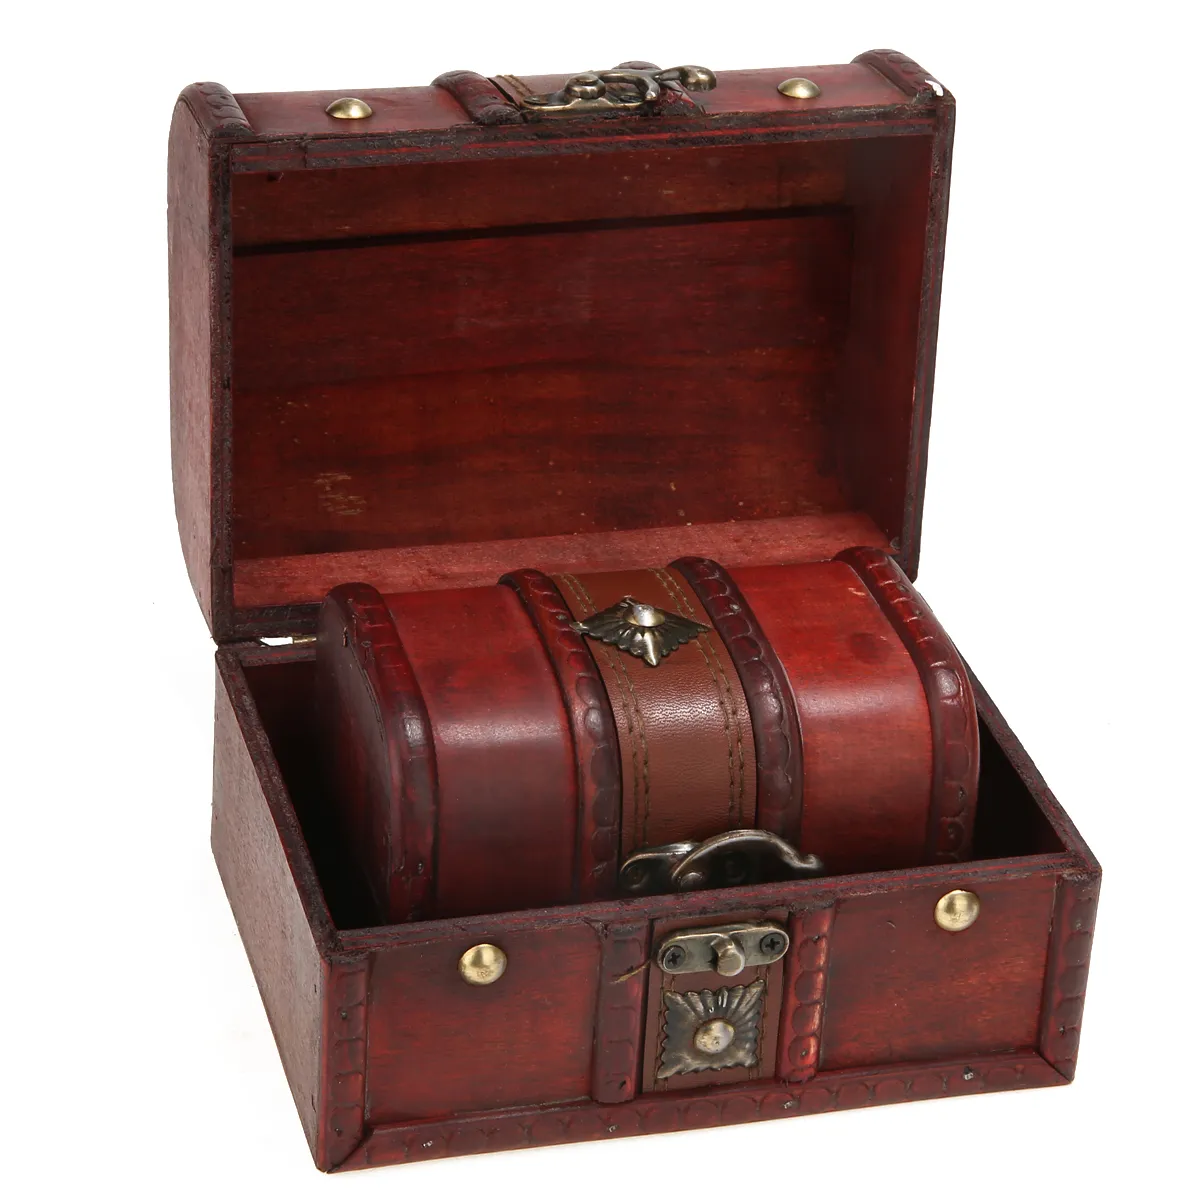 Vintage Wooden Case Jewelry Storage Box Small Treasure Chest Wood Crate Case Home Storage Boxes 2103158019466